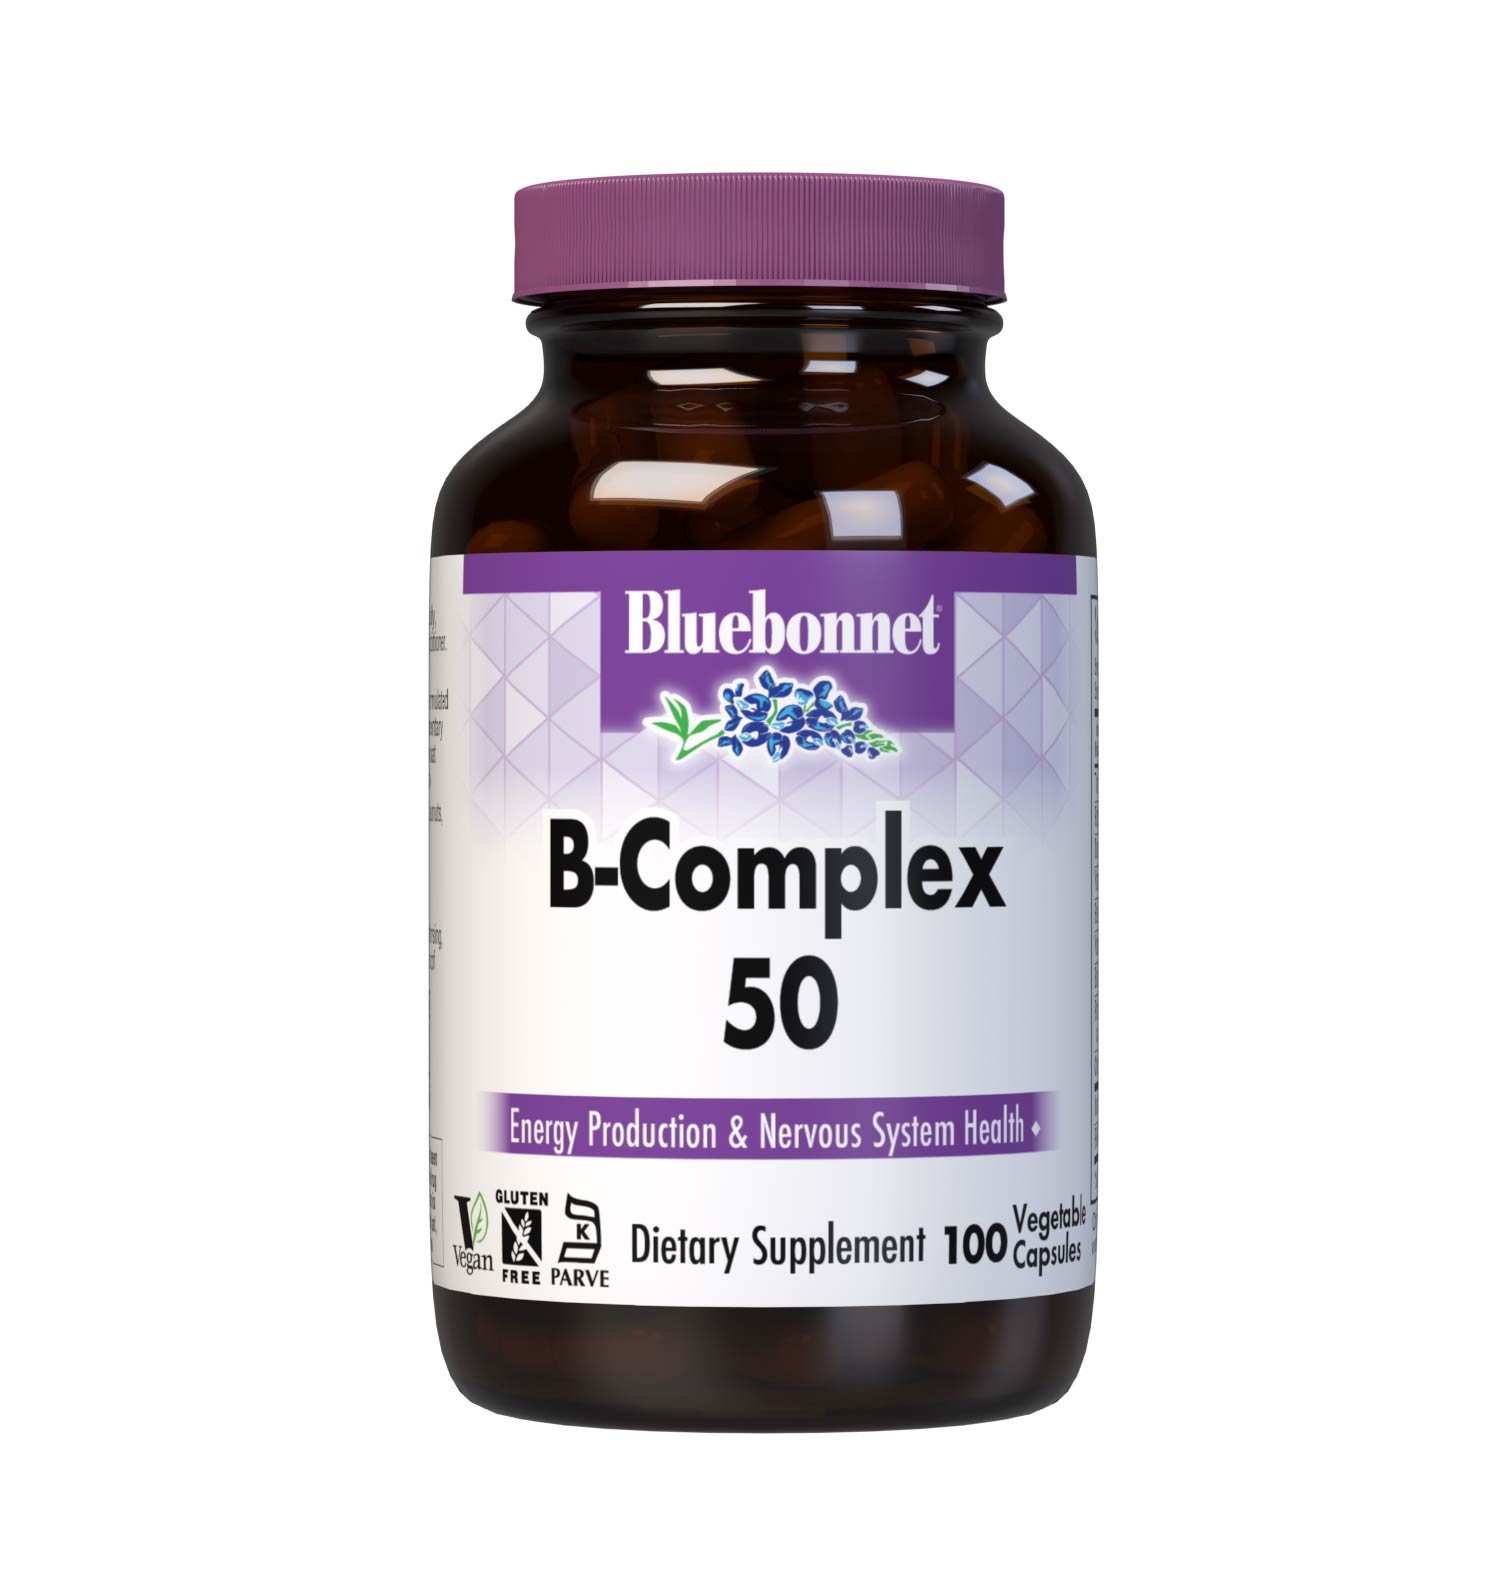 Bluebonnet’s B-Complex 50 Vegetable Capsules are formulated with a full spectrum of B vitamins which play a complementary role in maintaining physiologic and metabolic functions that support energy production and nervous system health. #size_100 count